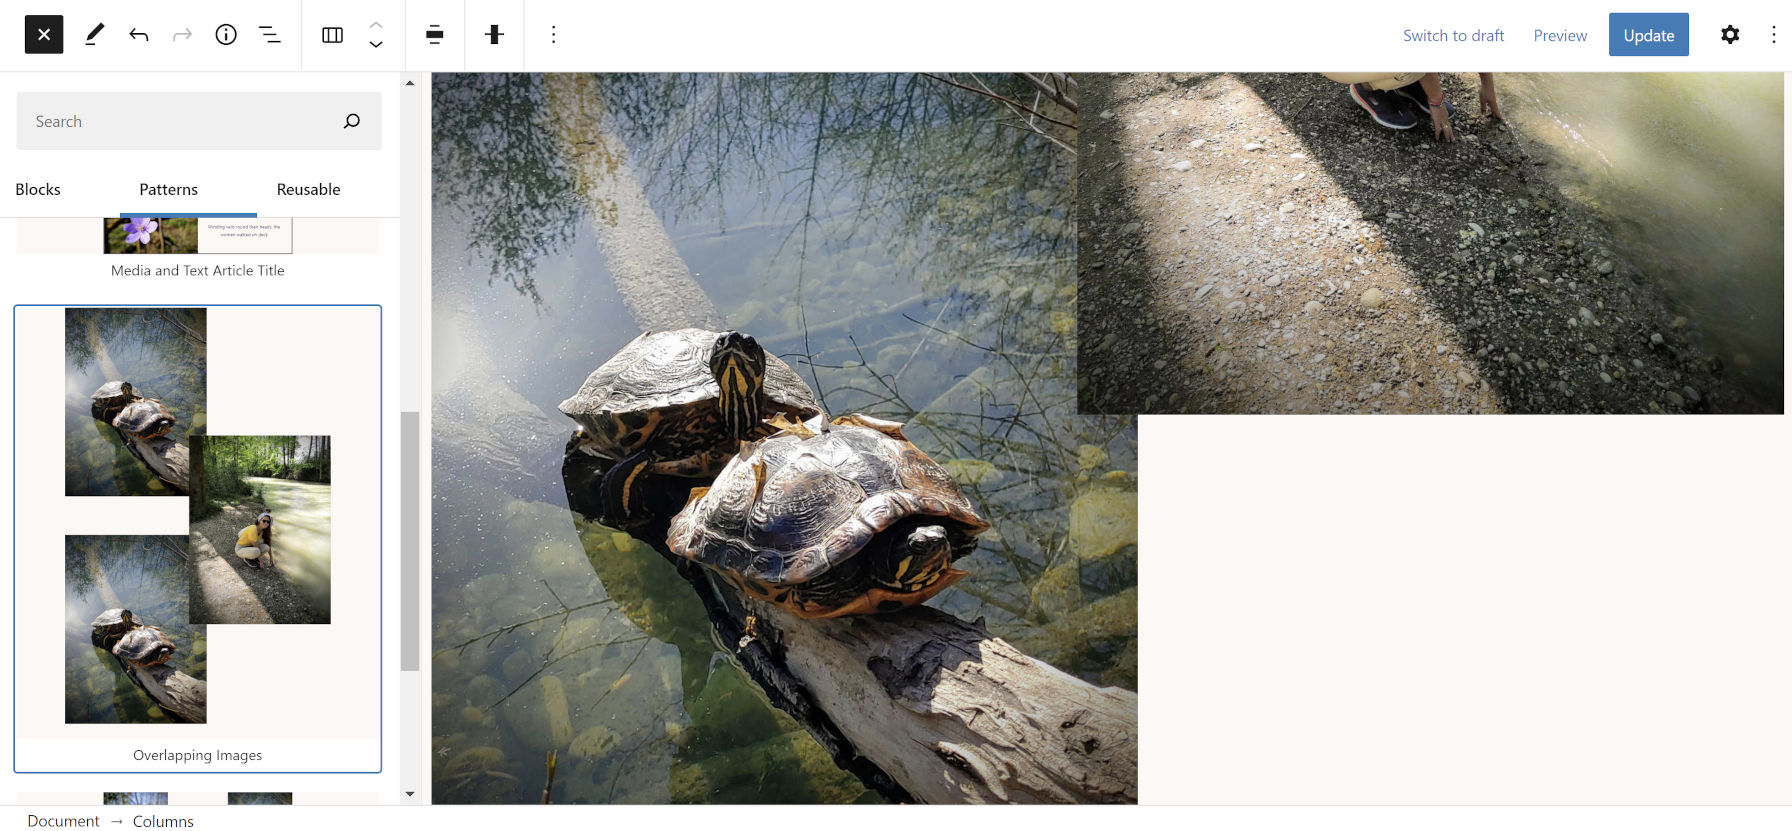 Overlapping images within columns shown in the WordPress block editor.